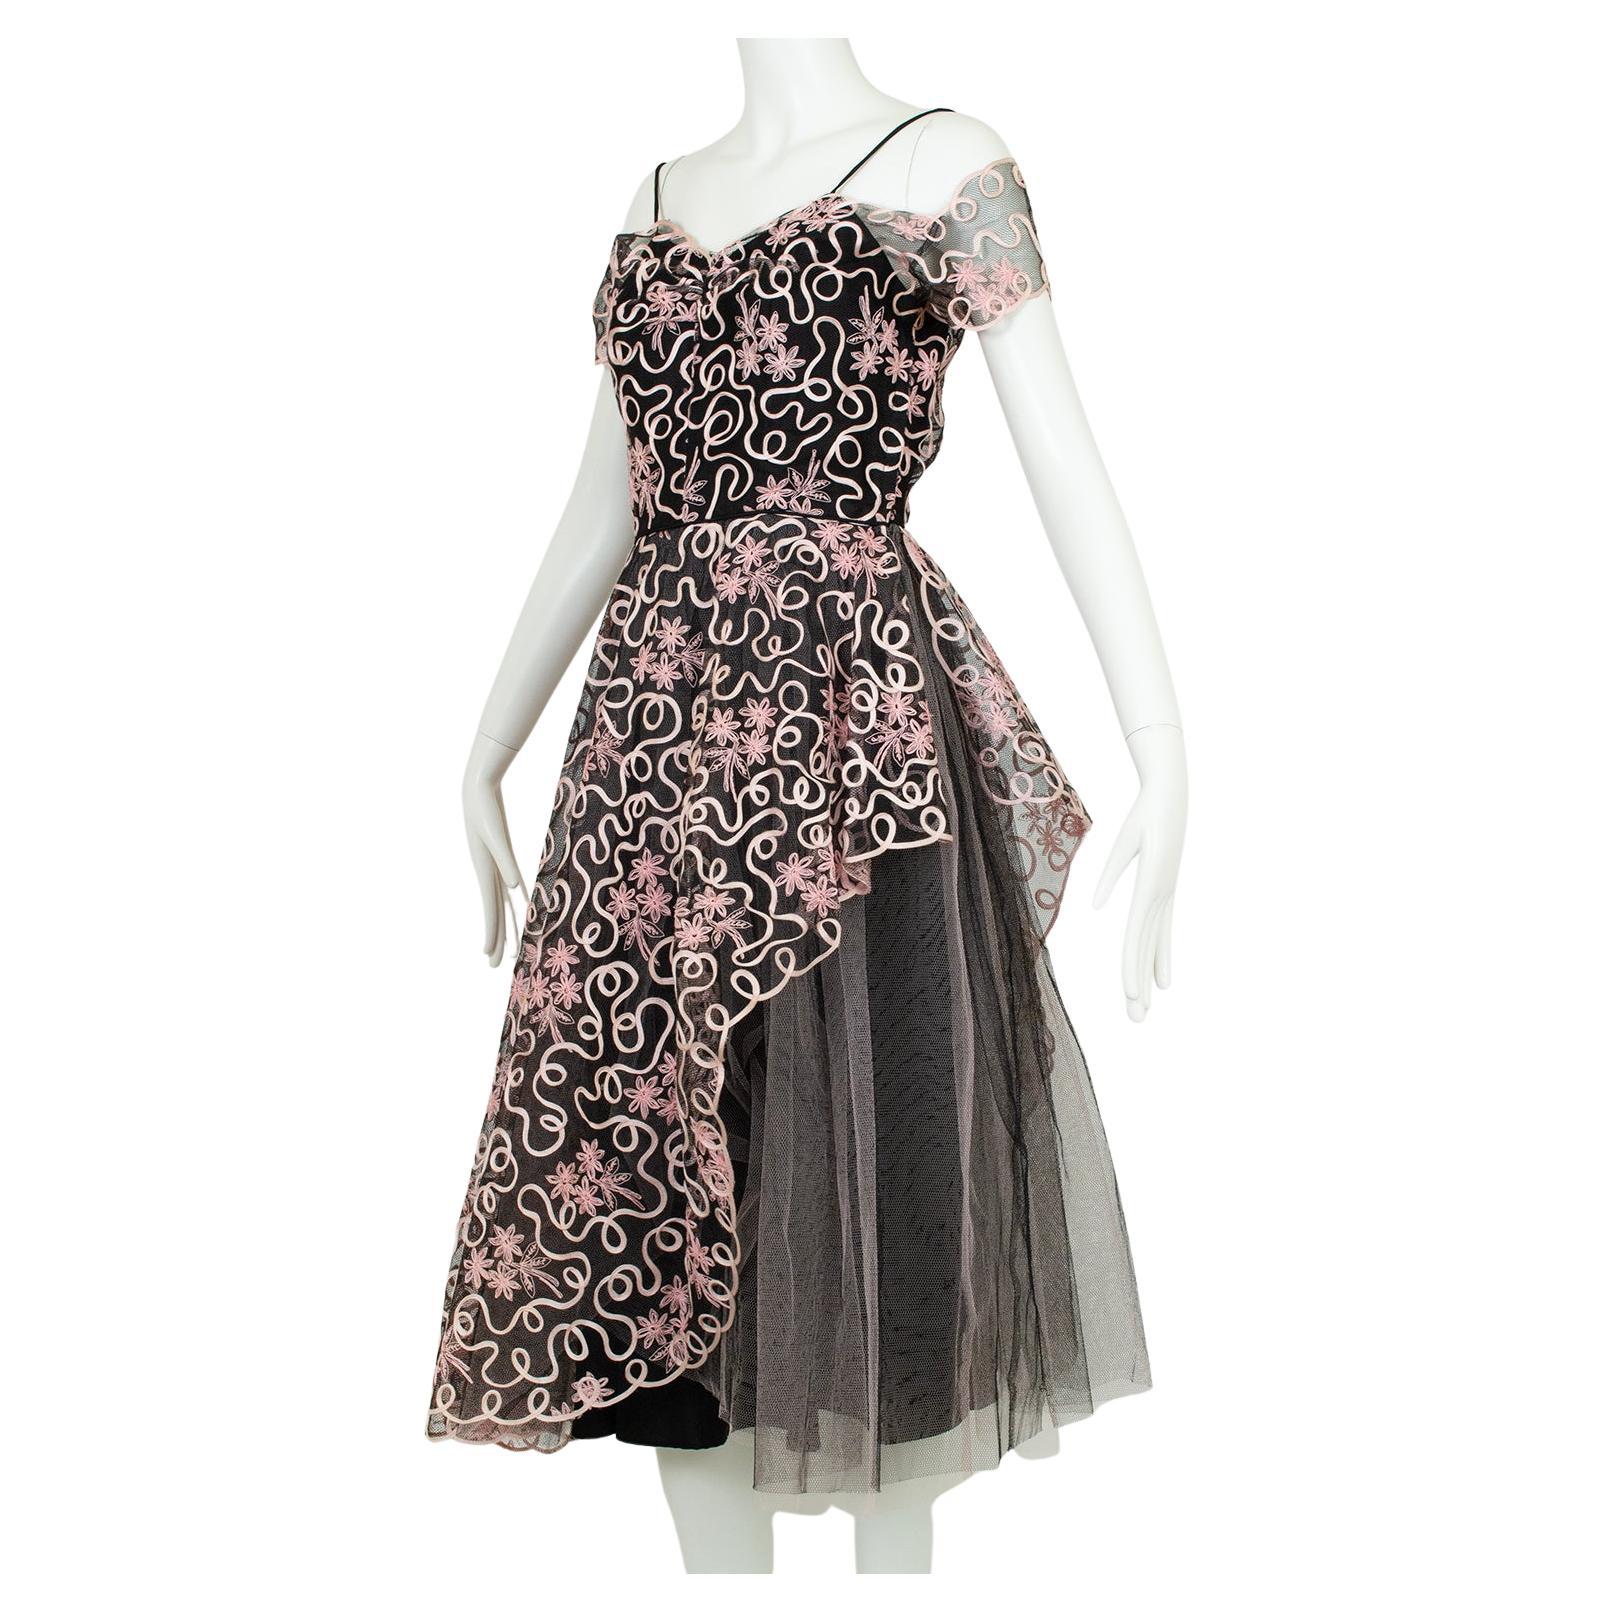 Emma Domb Black and Pink Ribbon Lace Asymmetrical Peplum Dress – S, 1950s For Sale